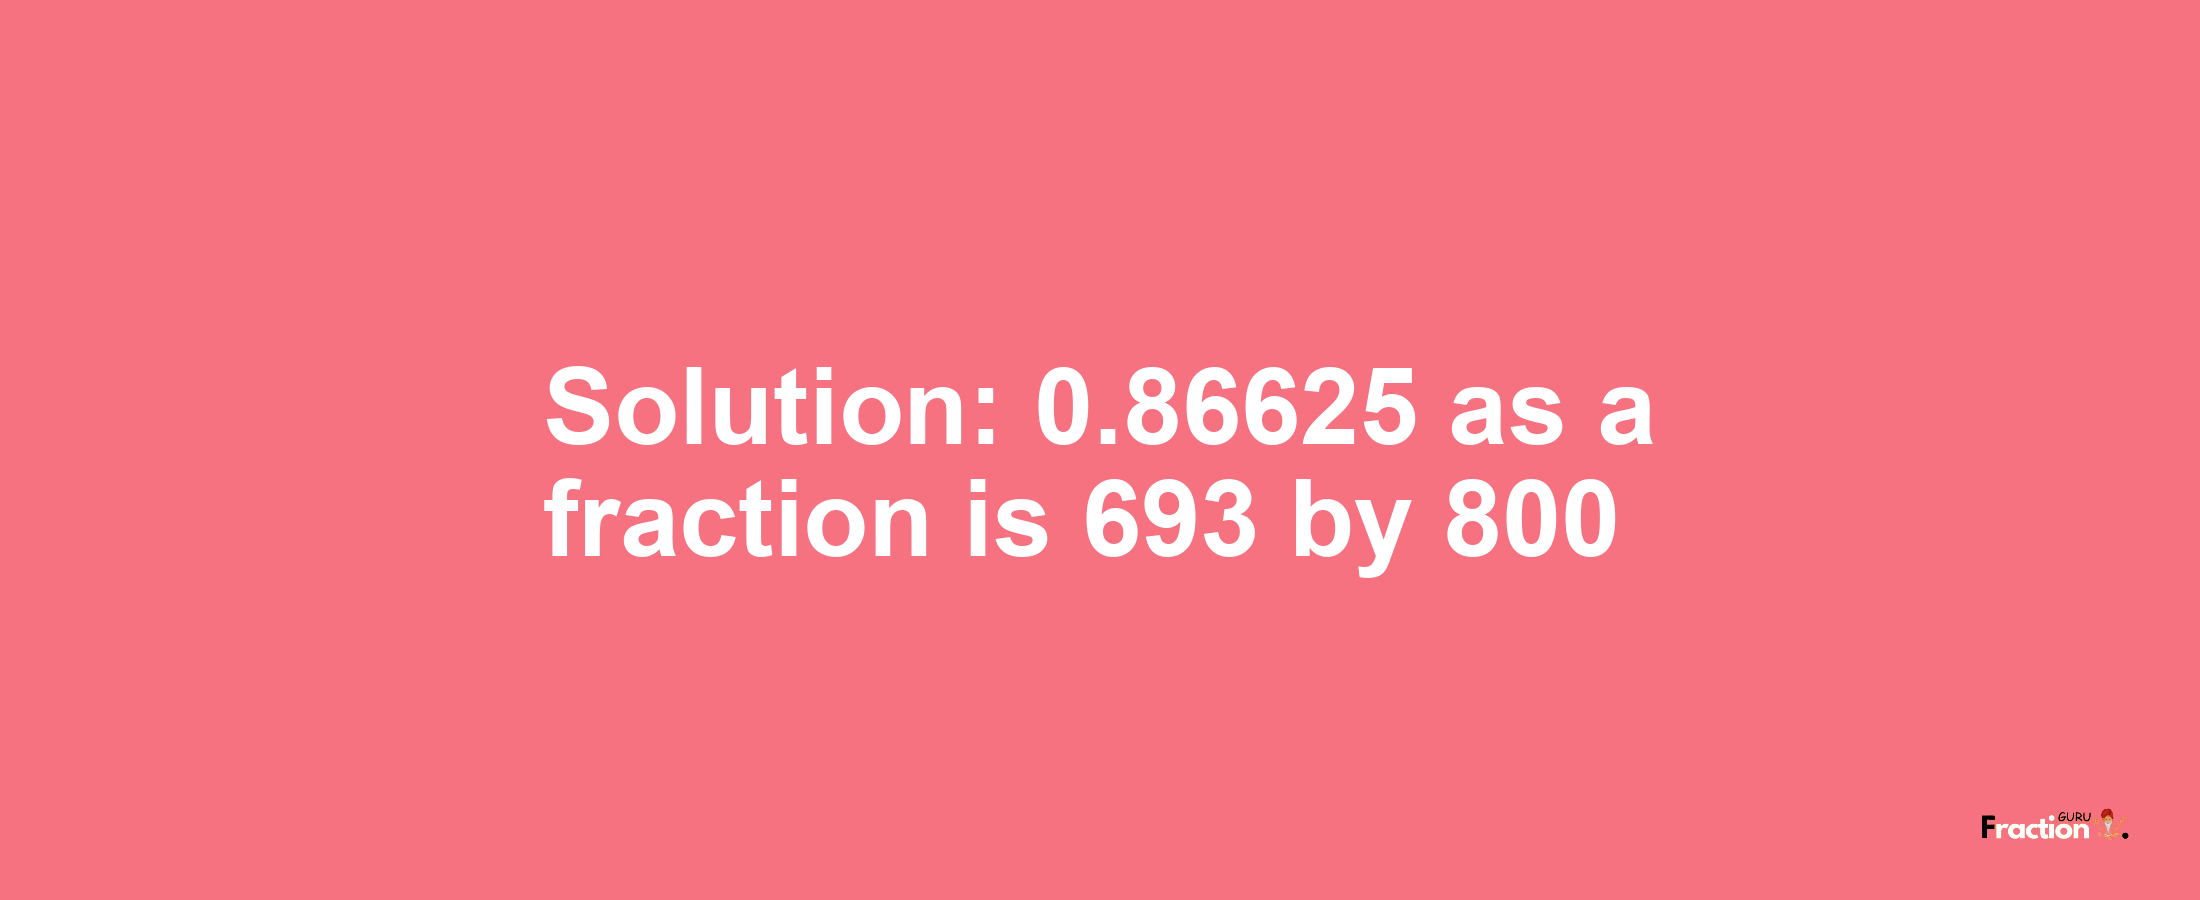 Solution:0.86625 as a fraction is 693/800